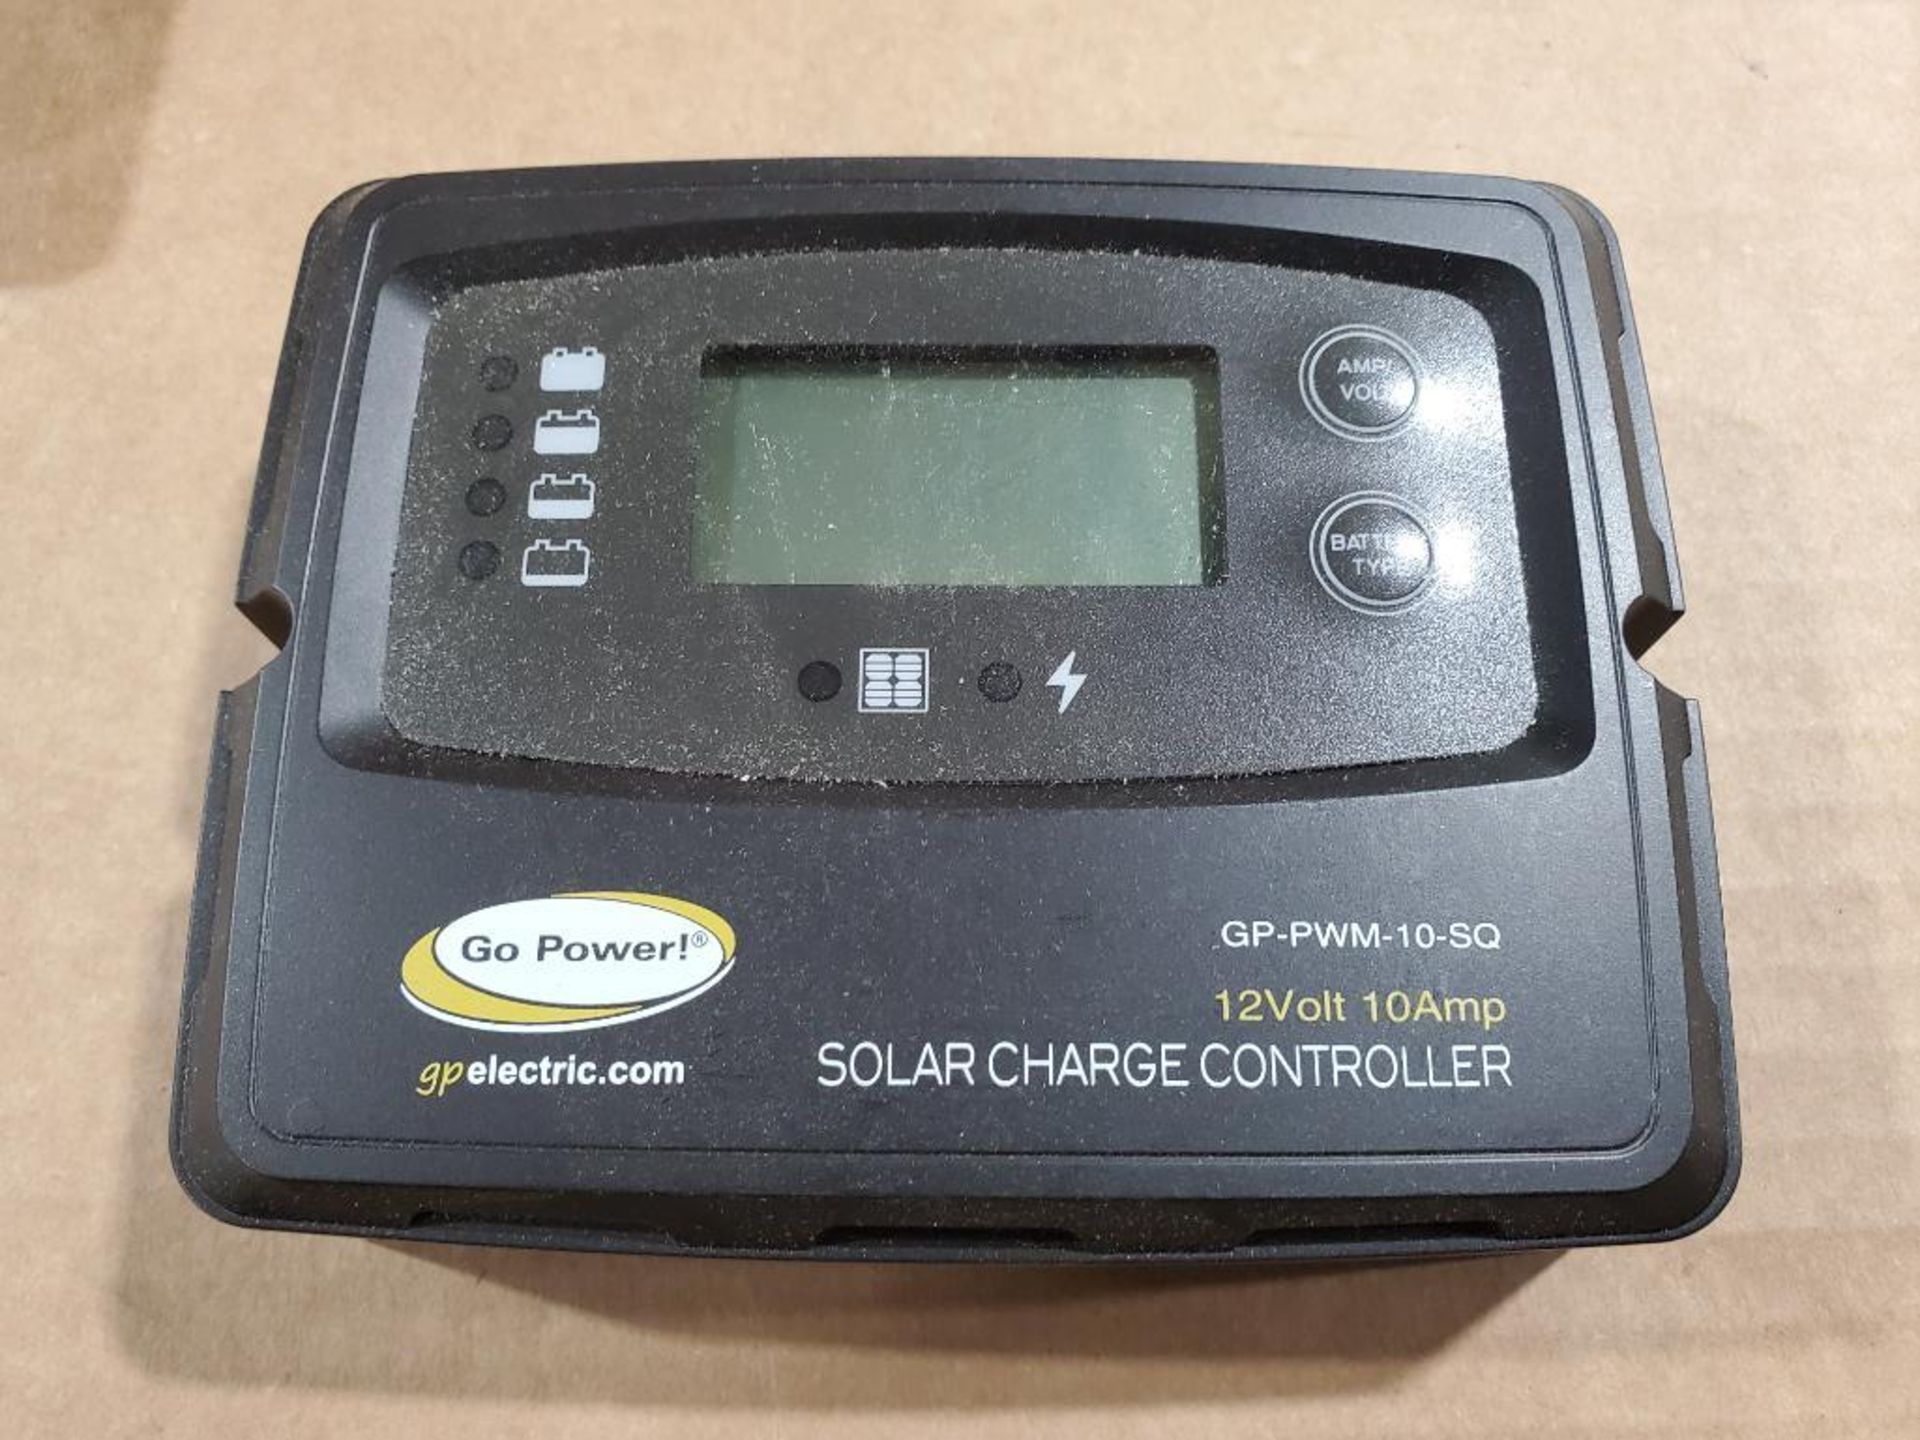 Qty 12 - Go Power solar charge controller. Model GP-PWM-10-SQ. - Image 3 of 6